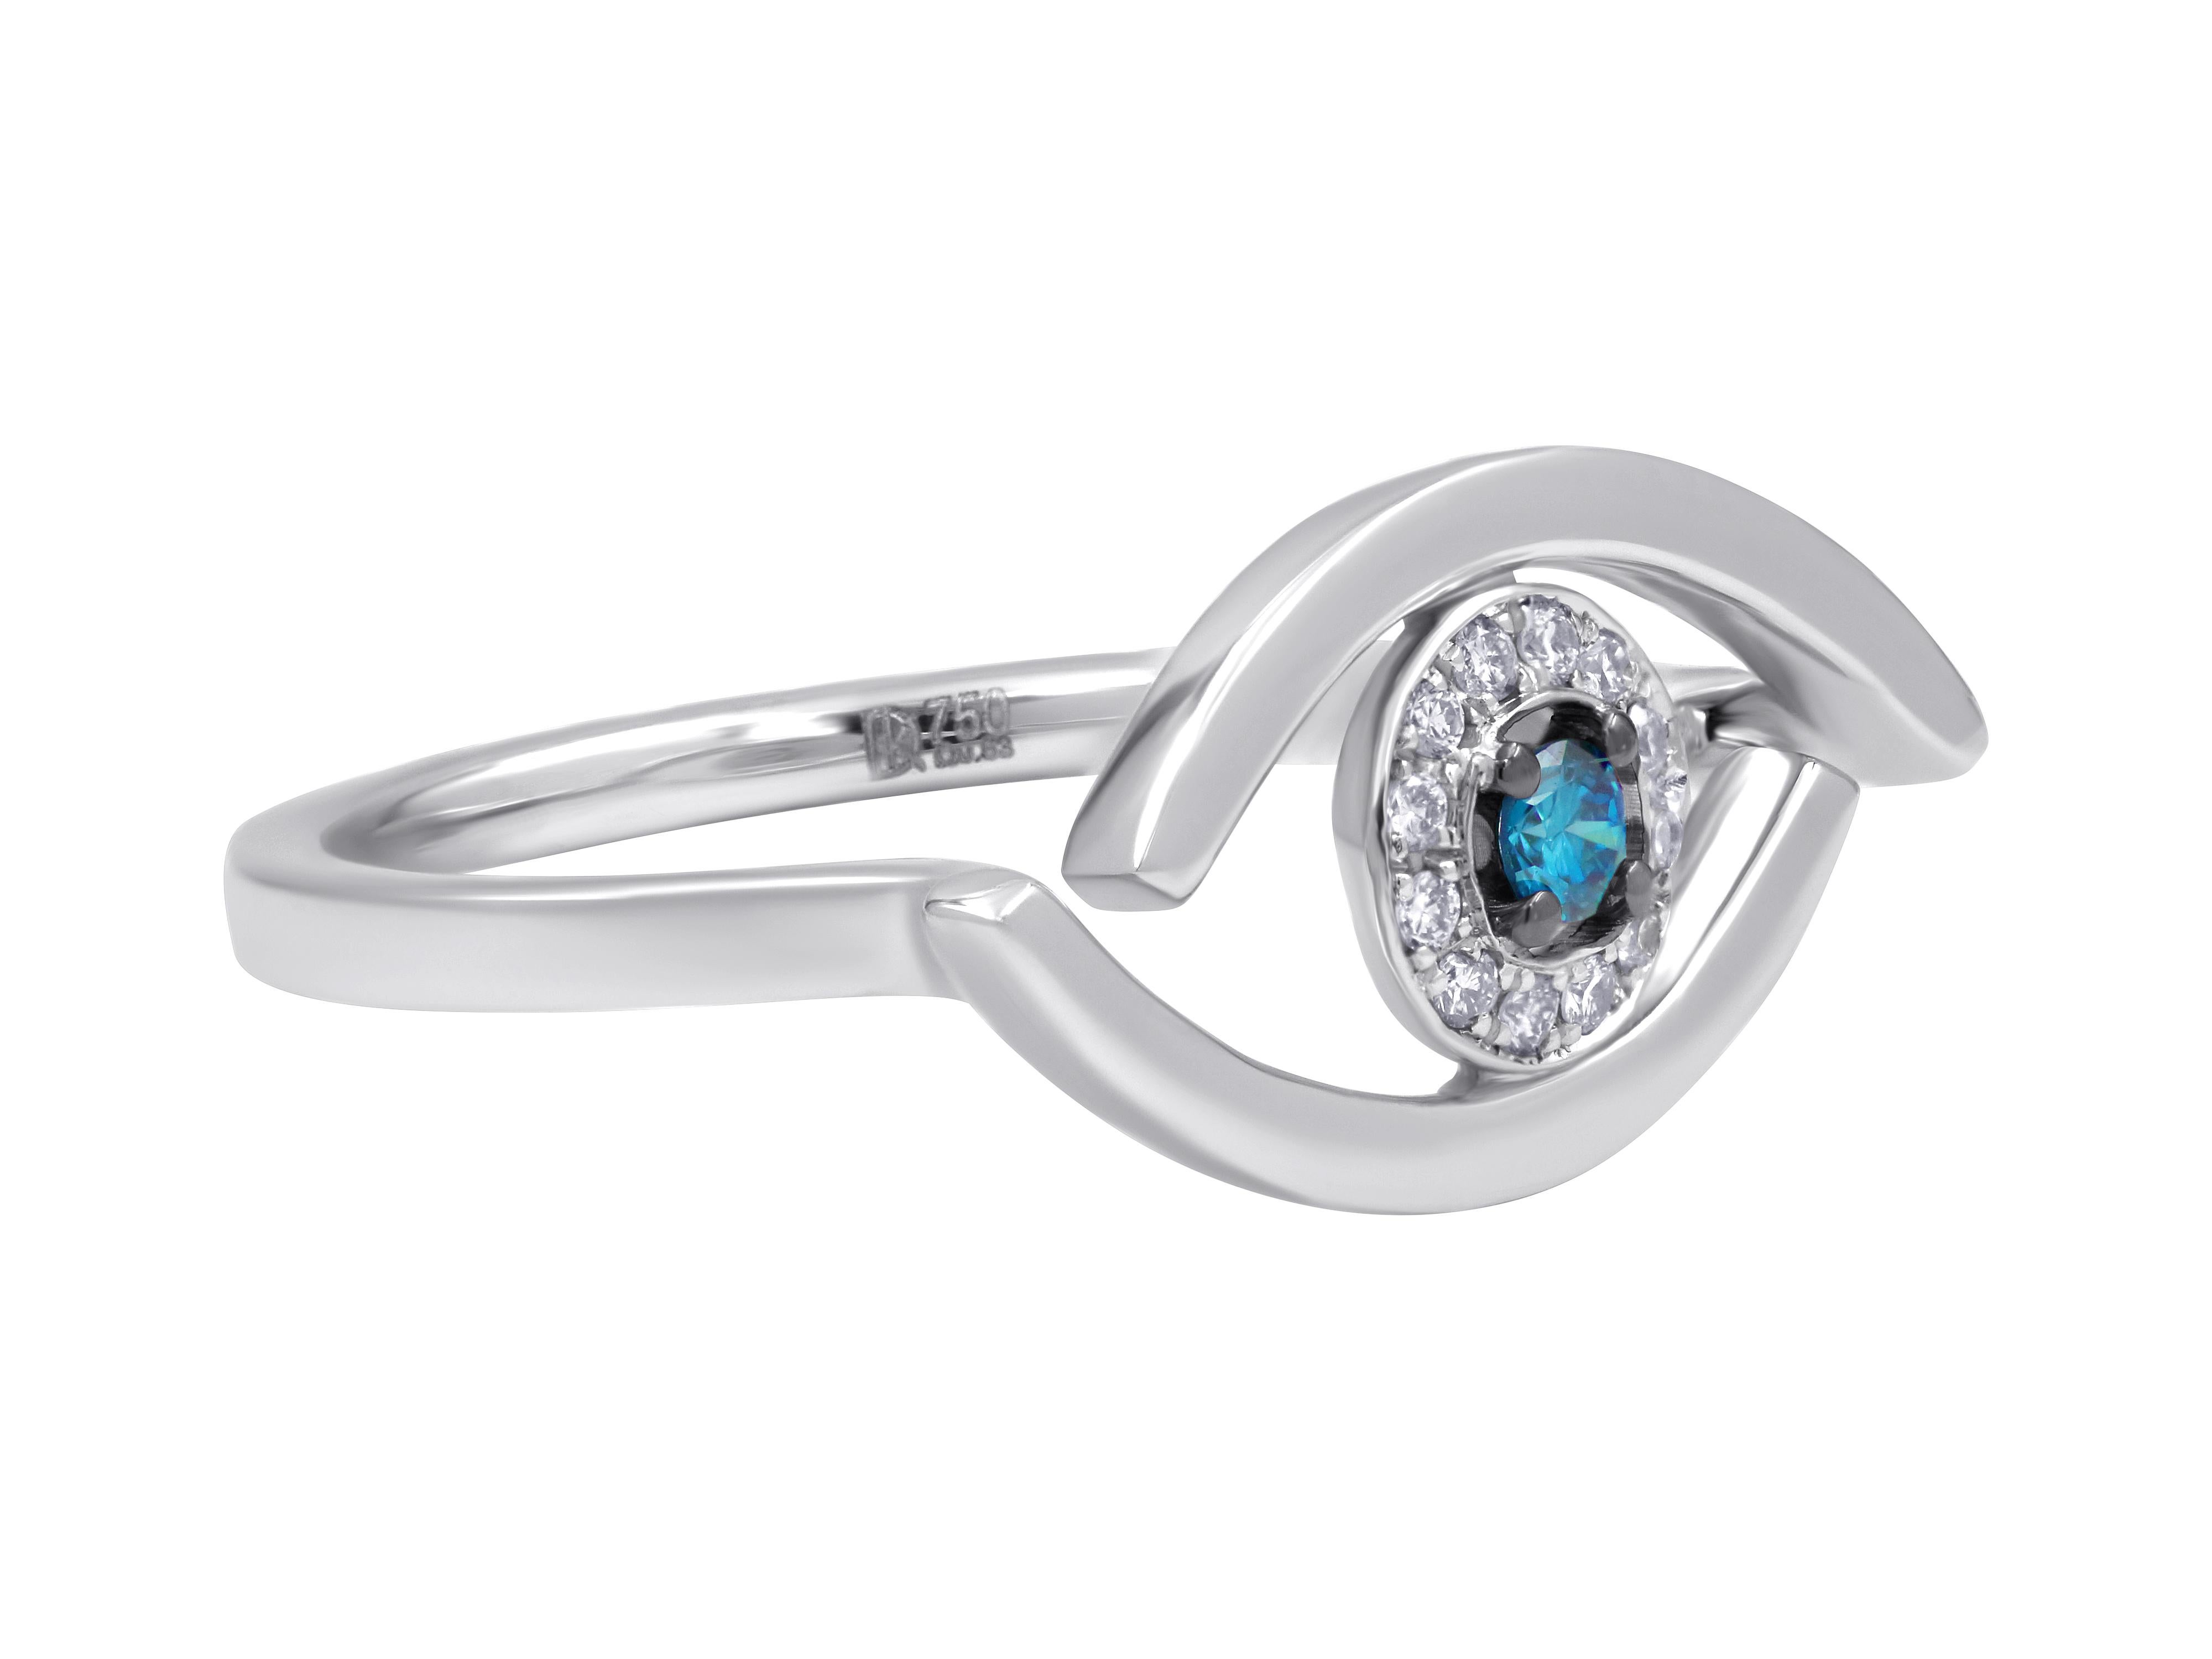 Evil eye ring with clean lines in 18k white gold set with 0.06 carats blue diamond and 0.07 brilliant cut white diamonds. 

Ring face: 0.393X0.787